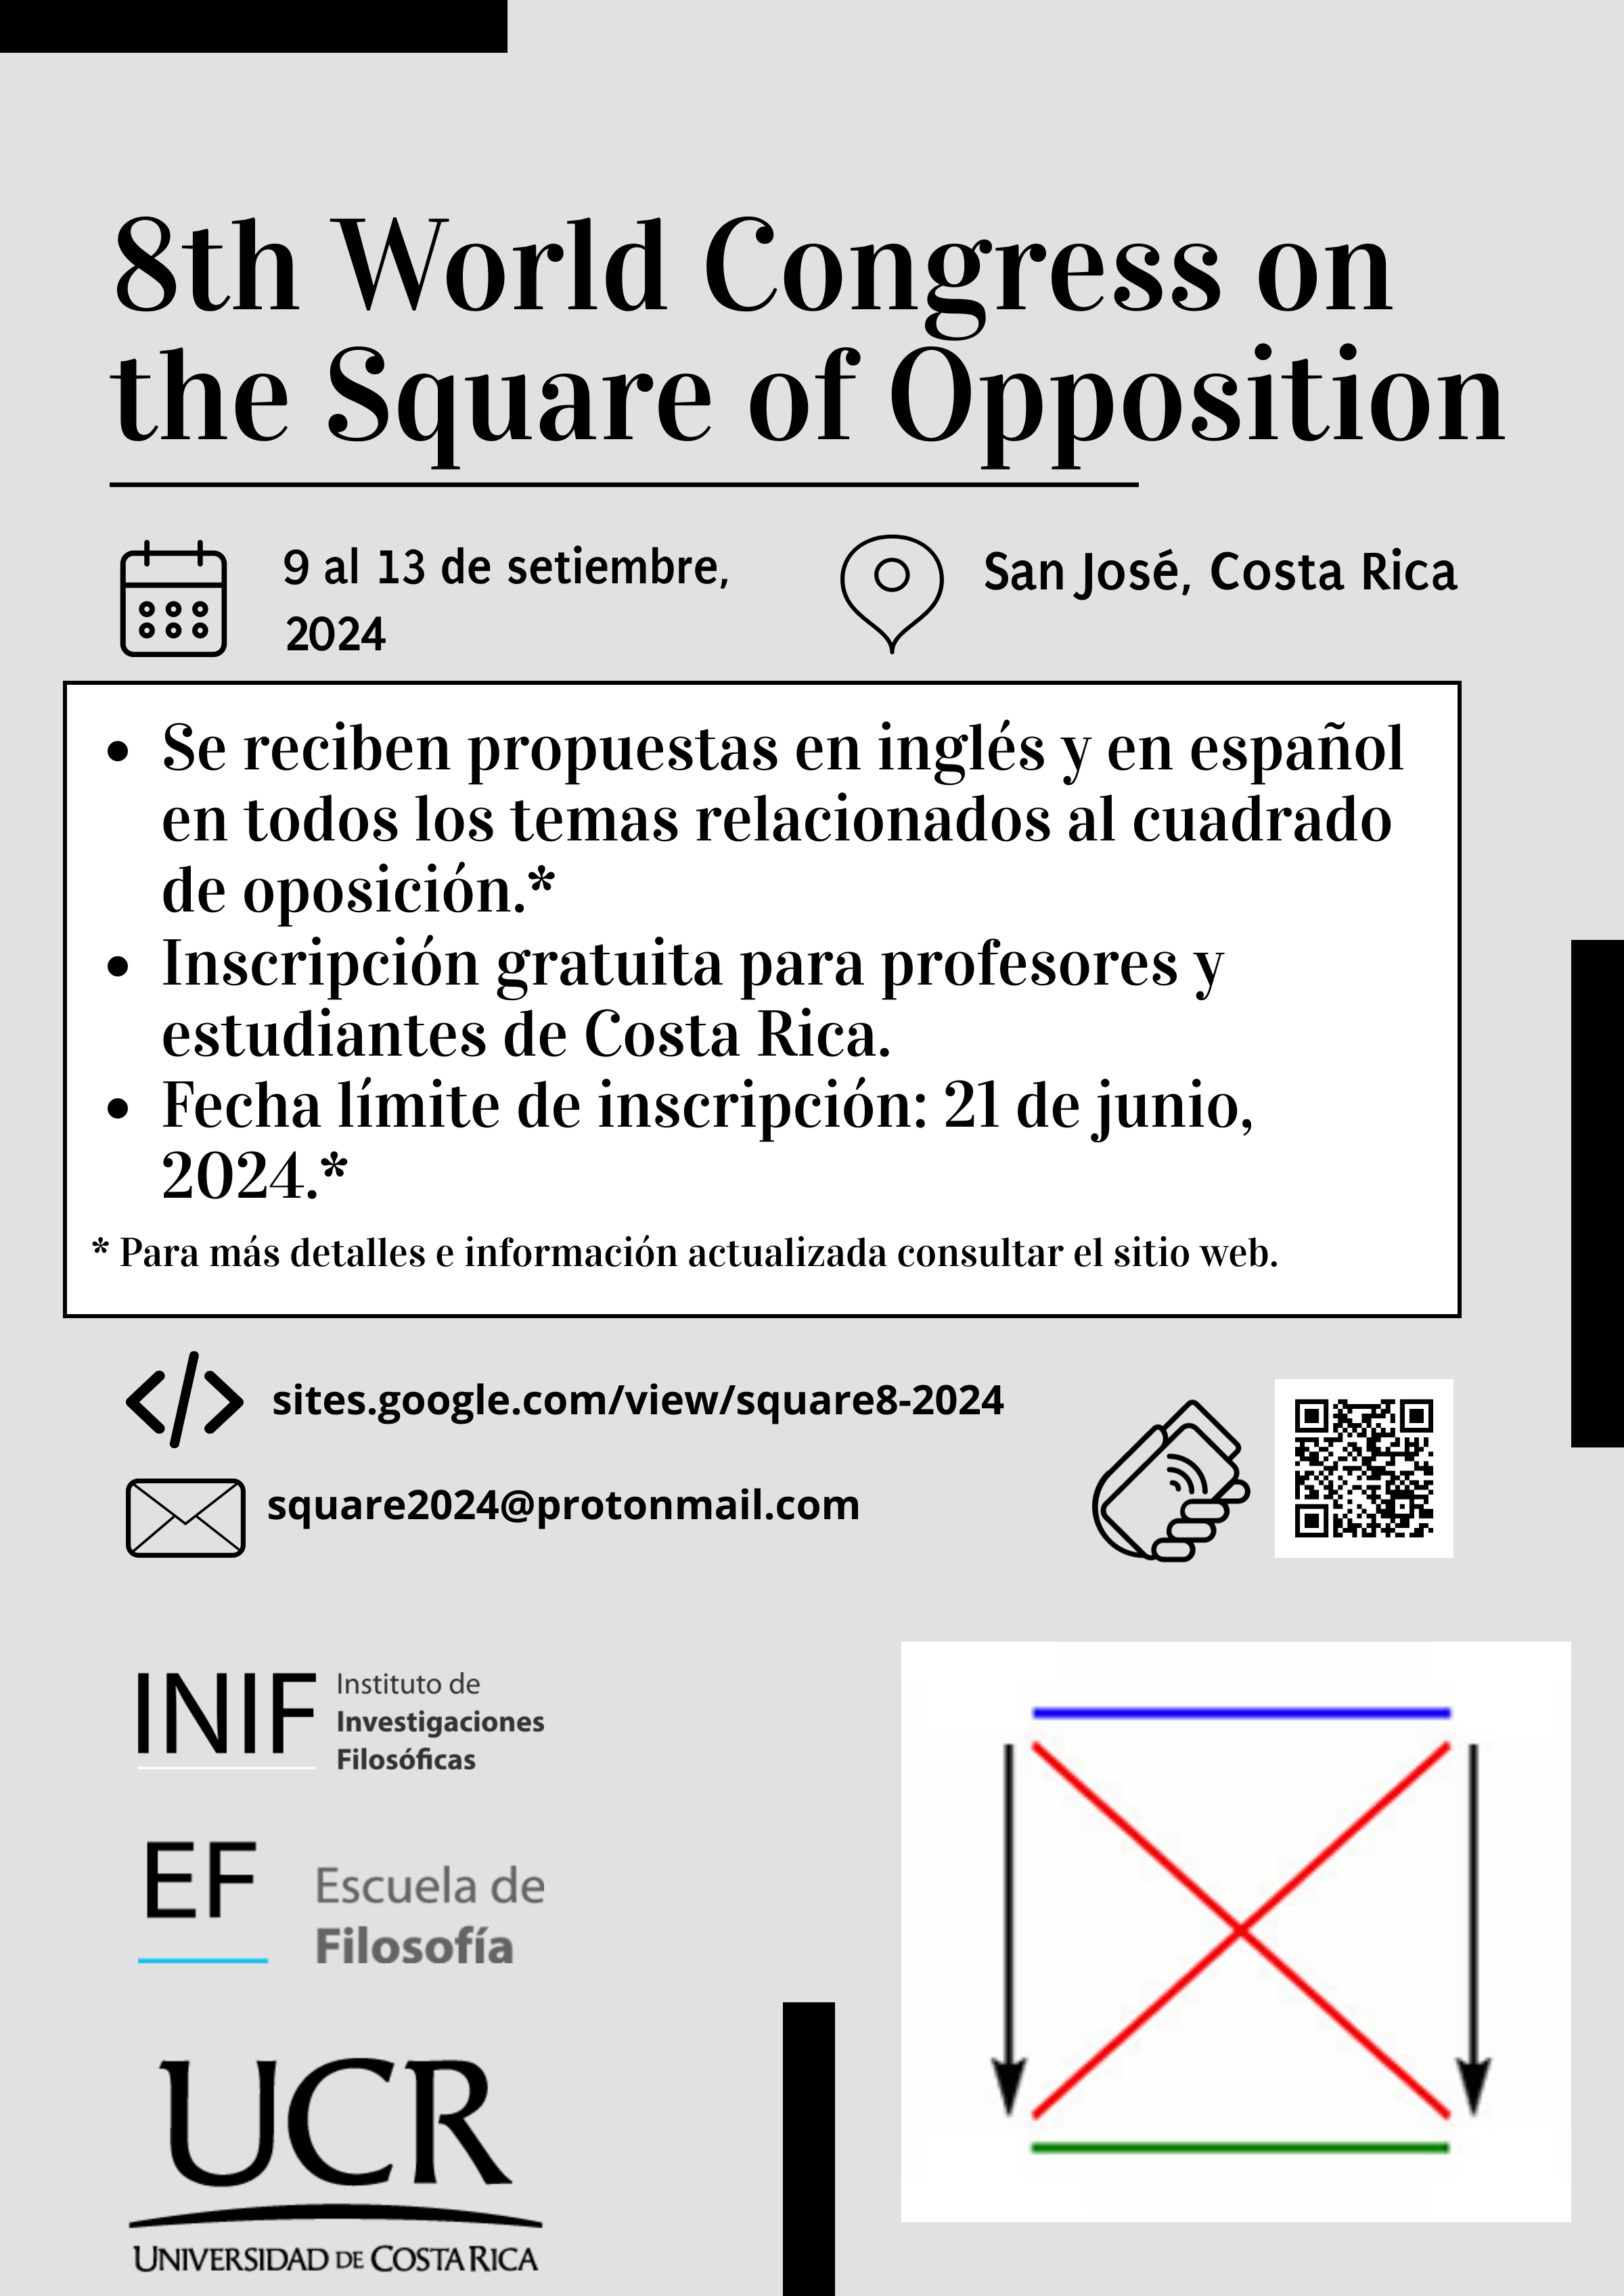 8th World Congress on the Square of Opposition